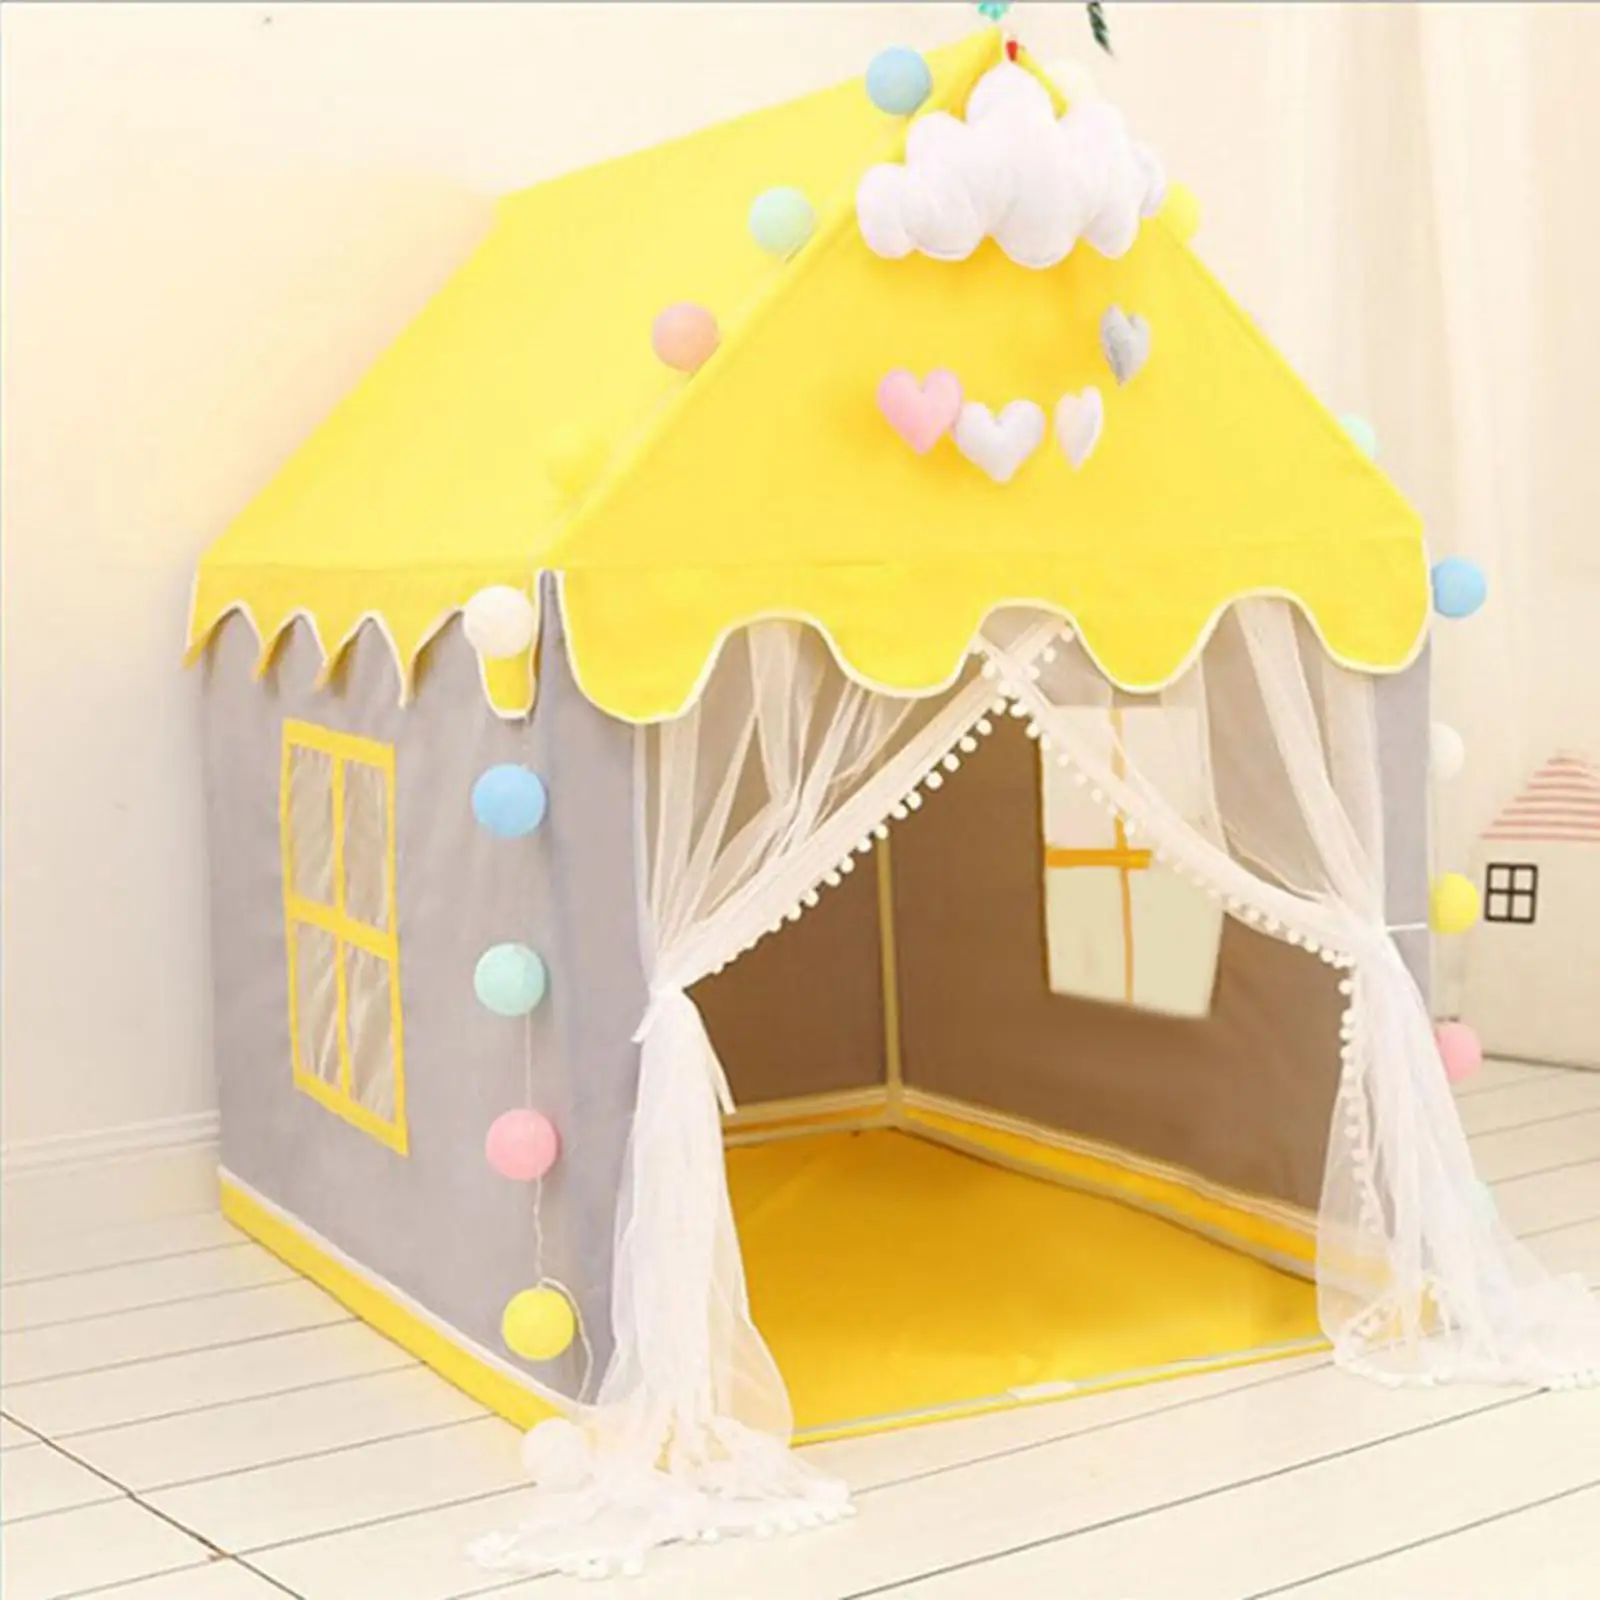 Kids Play Tent, Large Indoor Playhouse with Windows, Boys & Girls Play Tent for